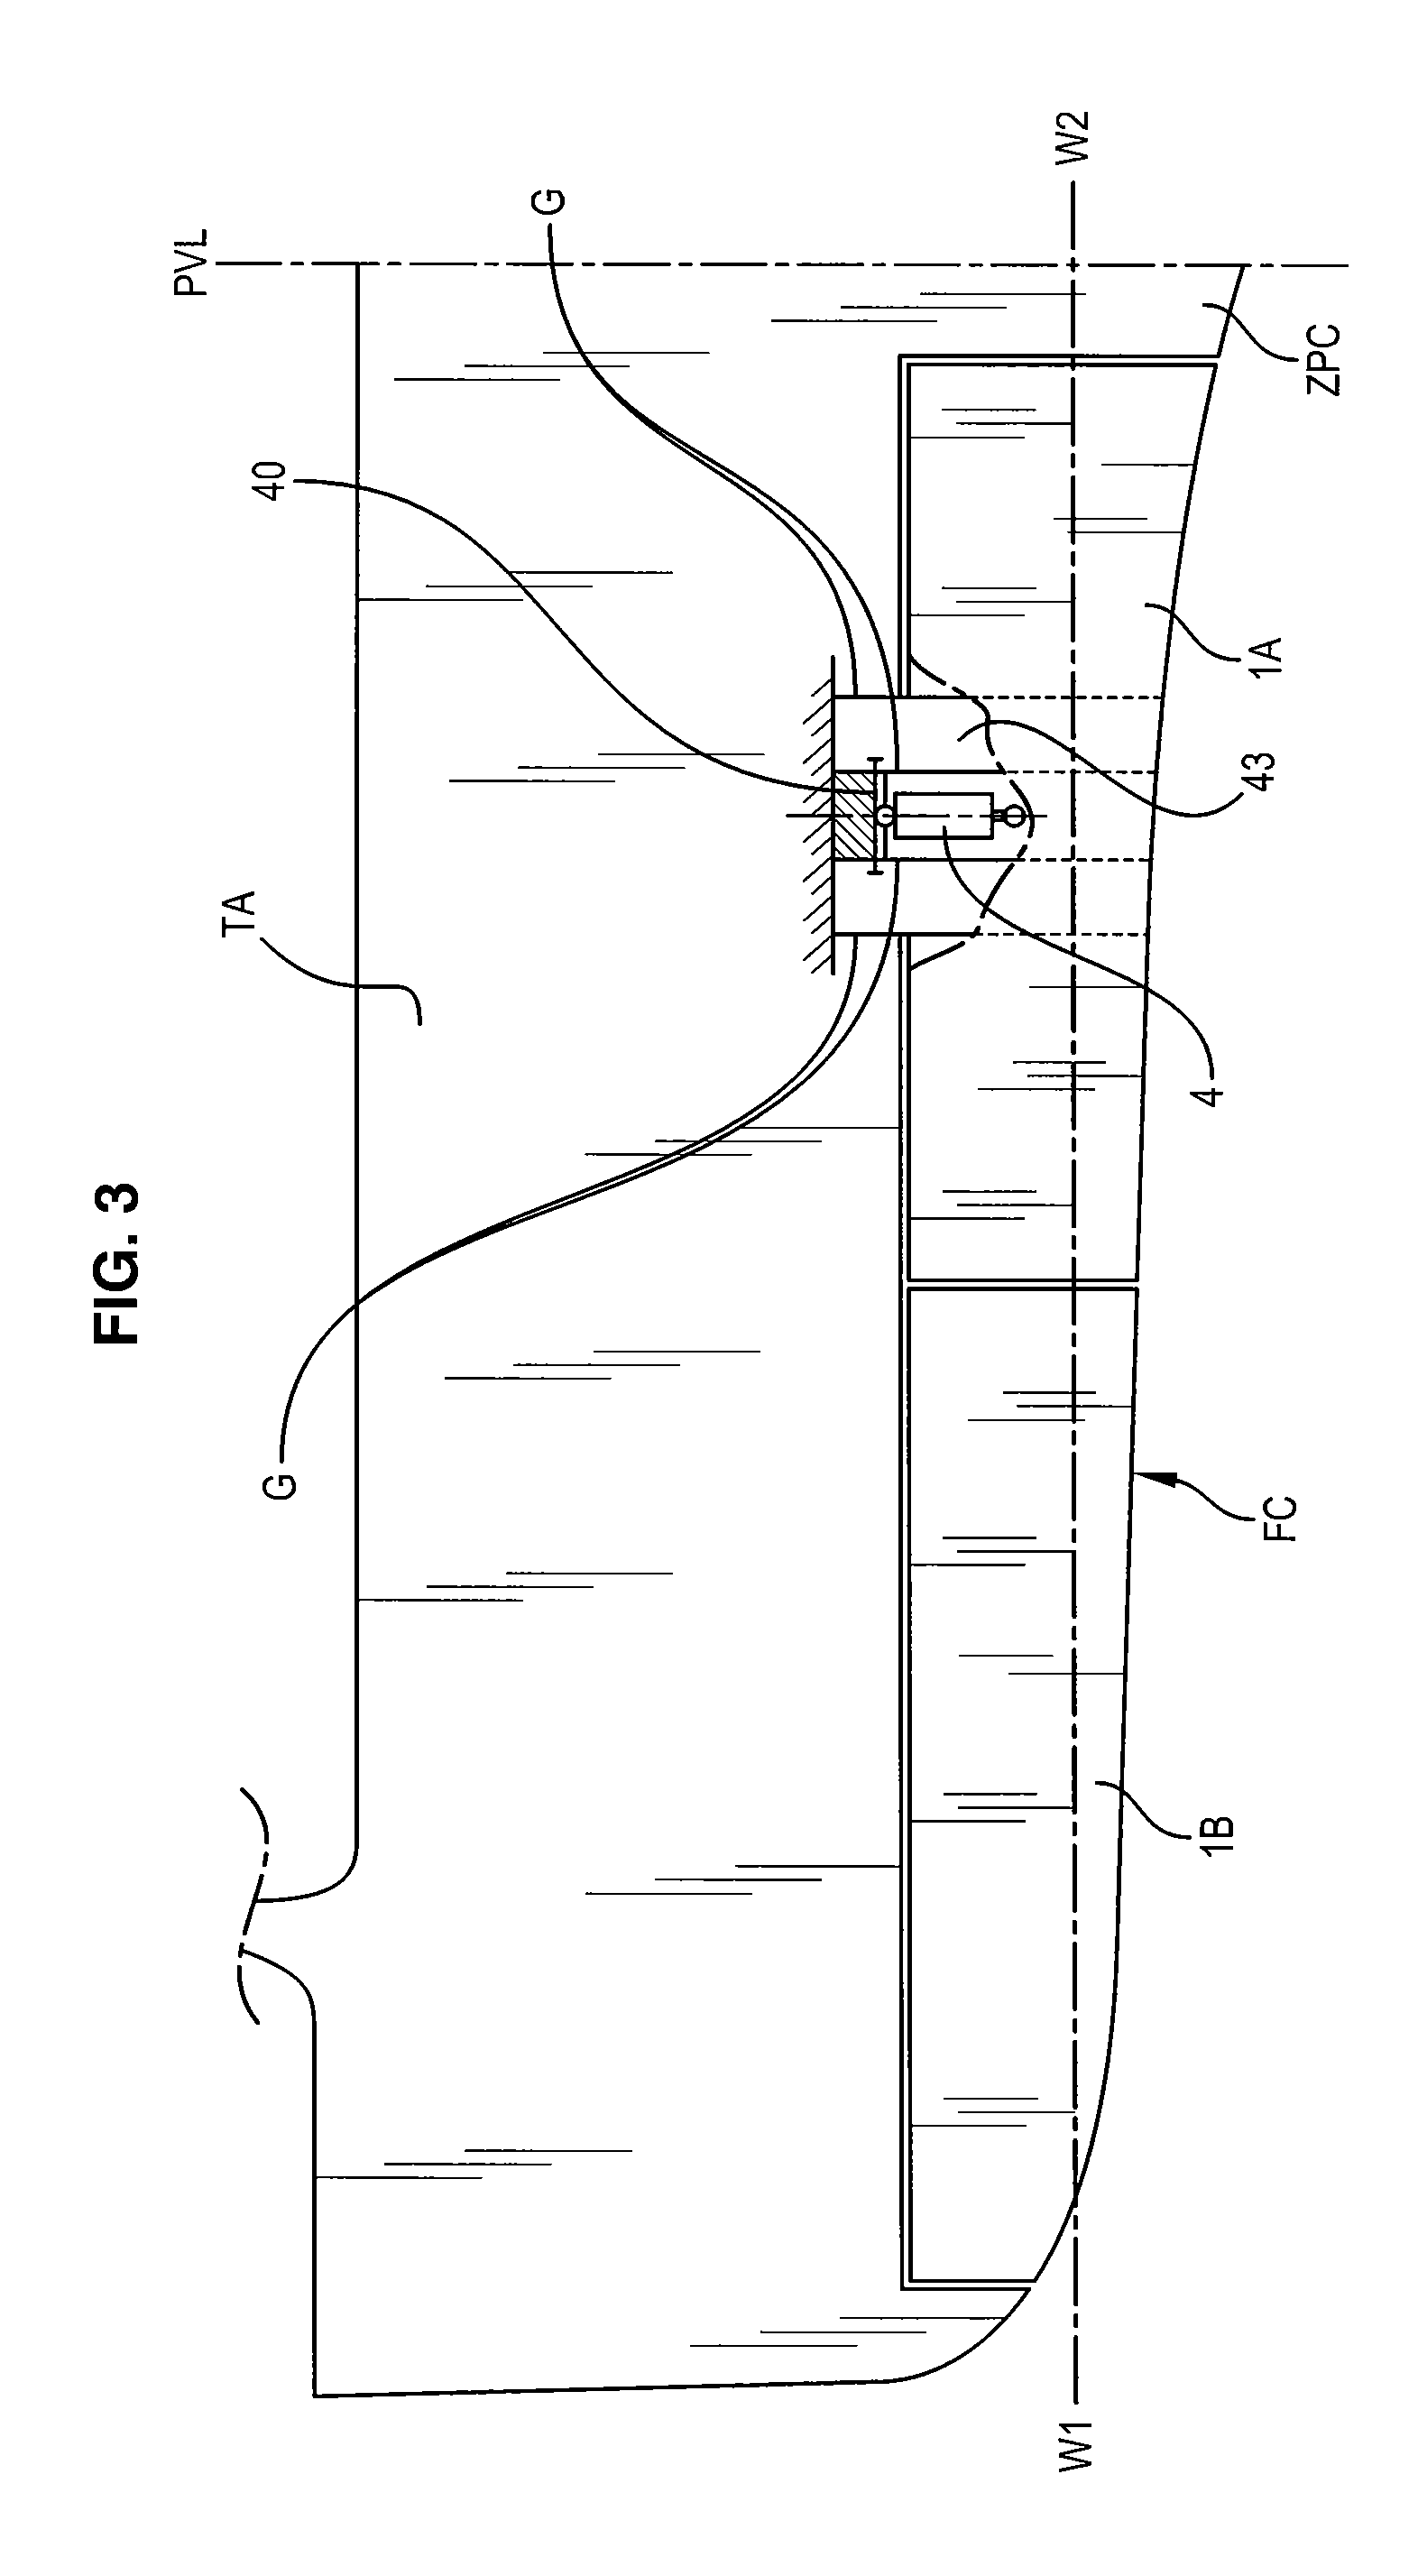 Ship with stern equipped with a device for deflecting a flow of water